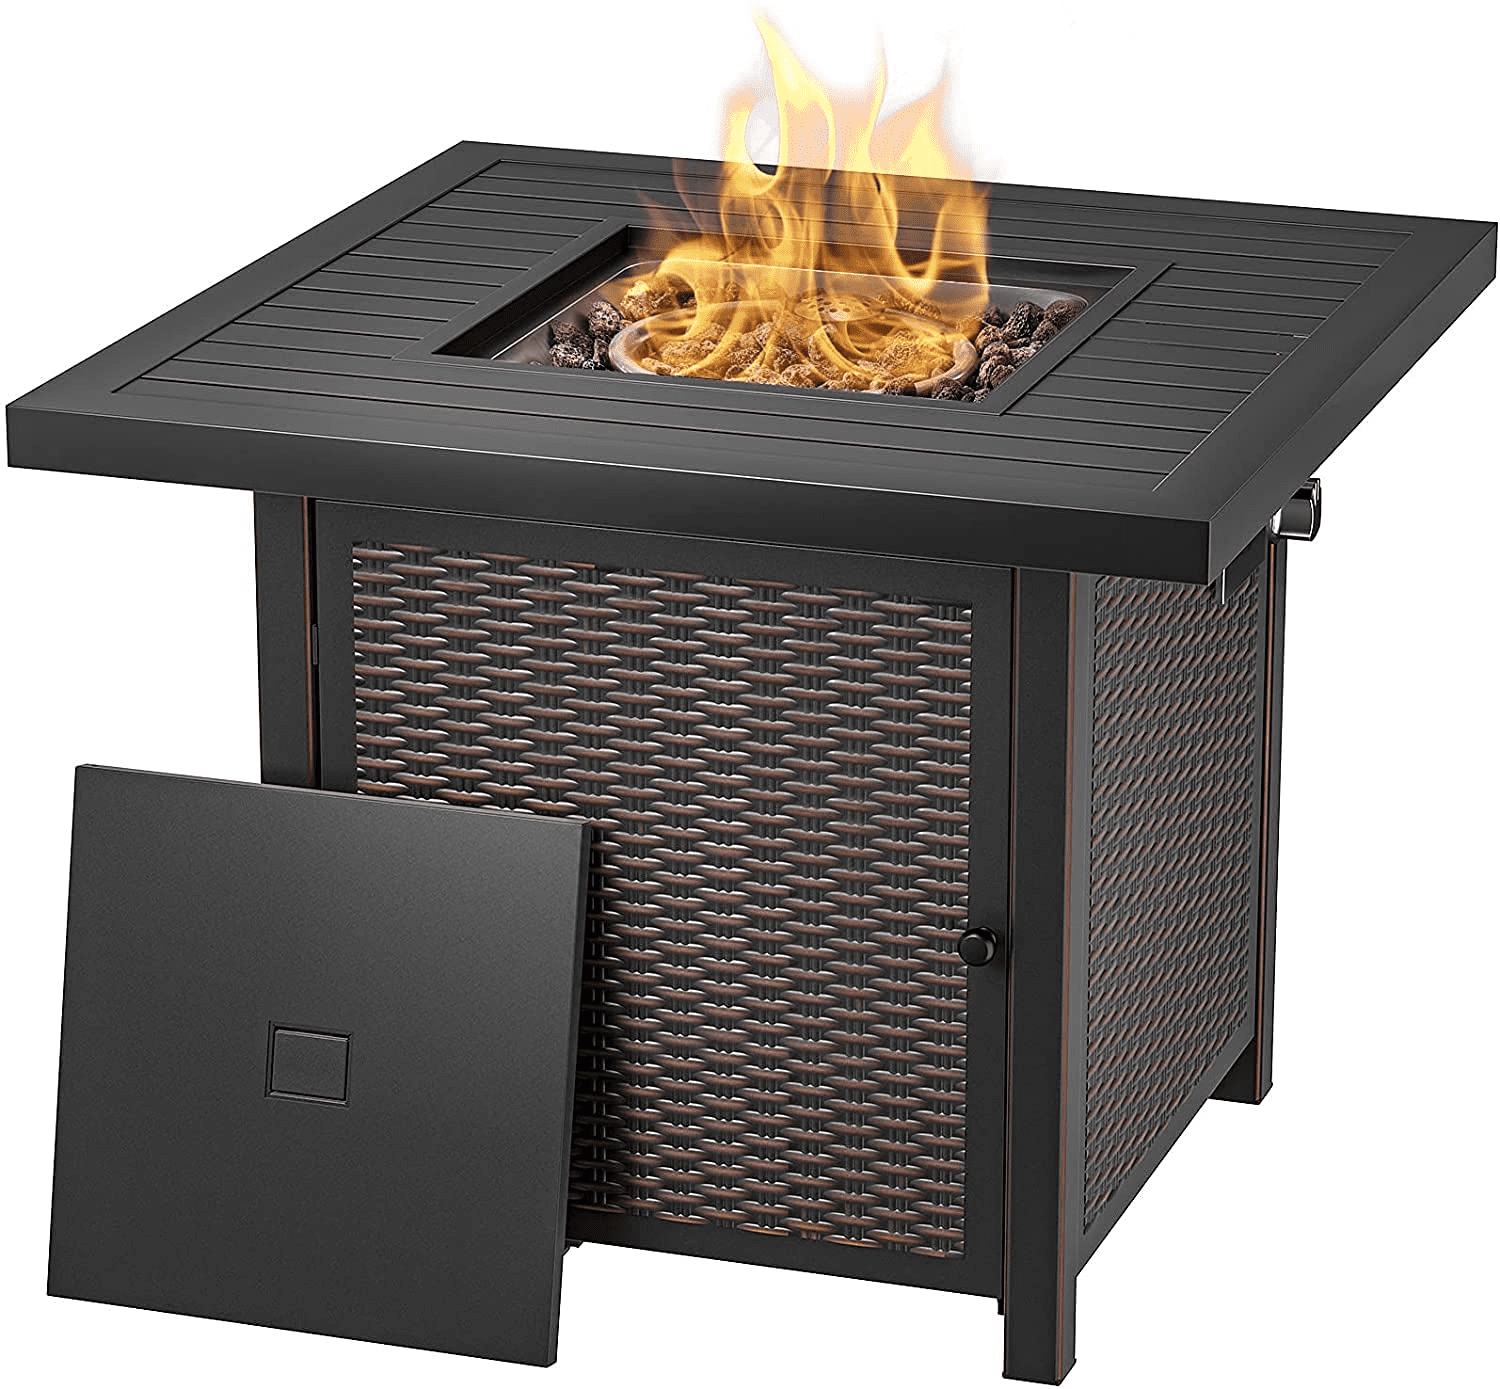 OT QOMOTOP Outdoor Propane Fire Pit Table 28 Inch 50,000 BTU Gas Fire Table with Auto-Ignition and CSA Certification Approval Suitable for Using on The Stone/Marble/Wooden Floor and Grassland 